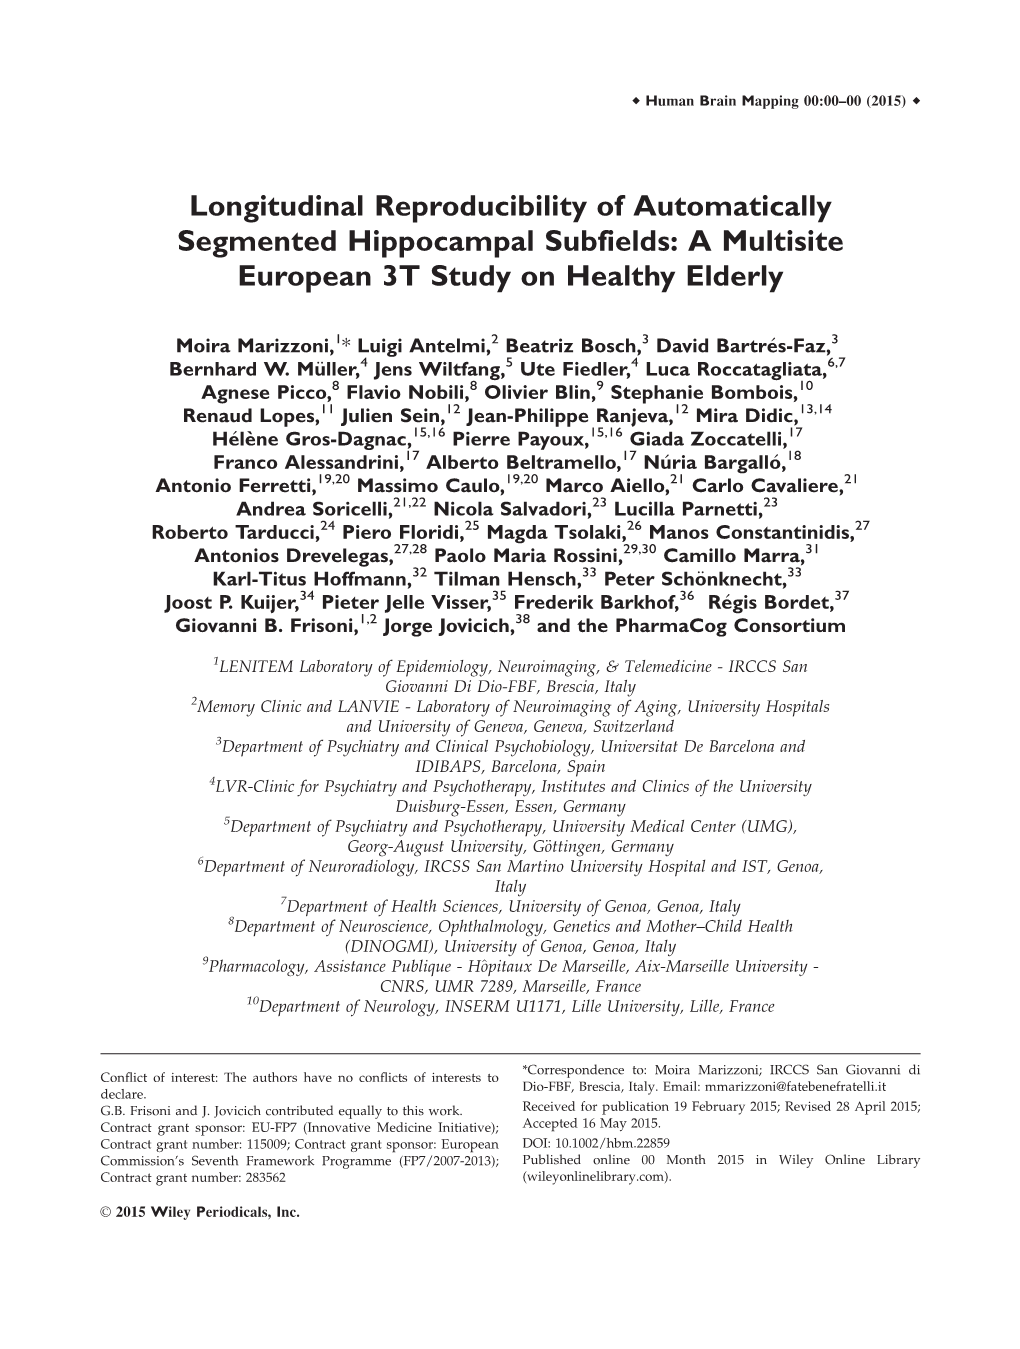 Longitudinal Reproducibility of Automatically Segmented Hippocampal Subfields: a Multisite European 3T Study on Healthy Elderly